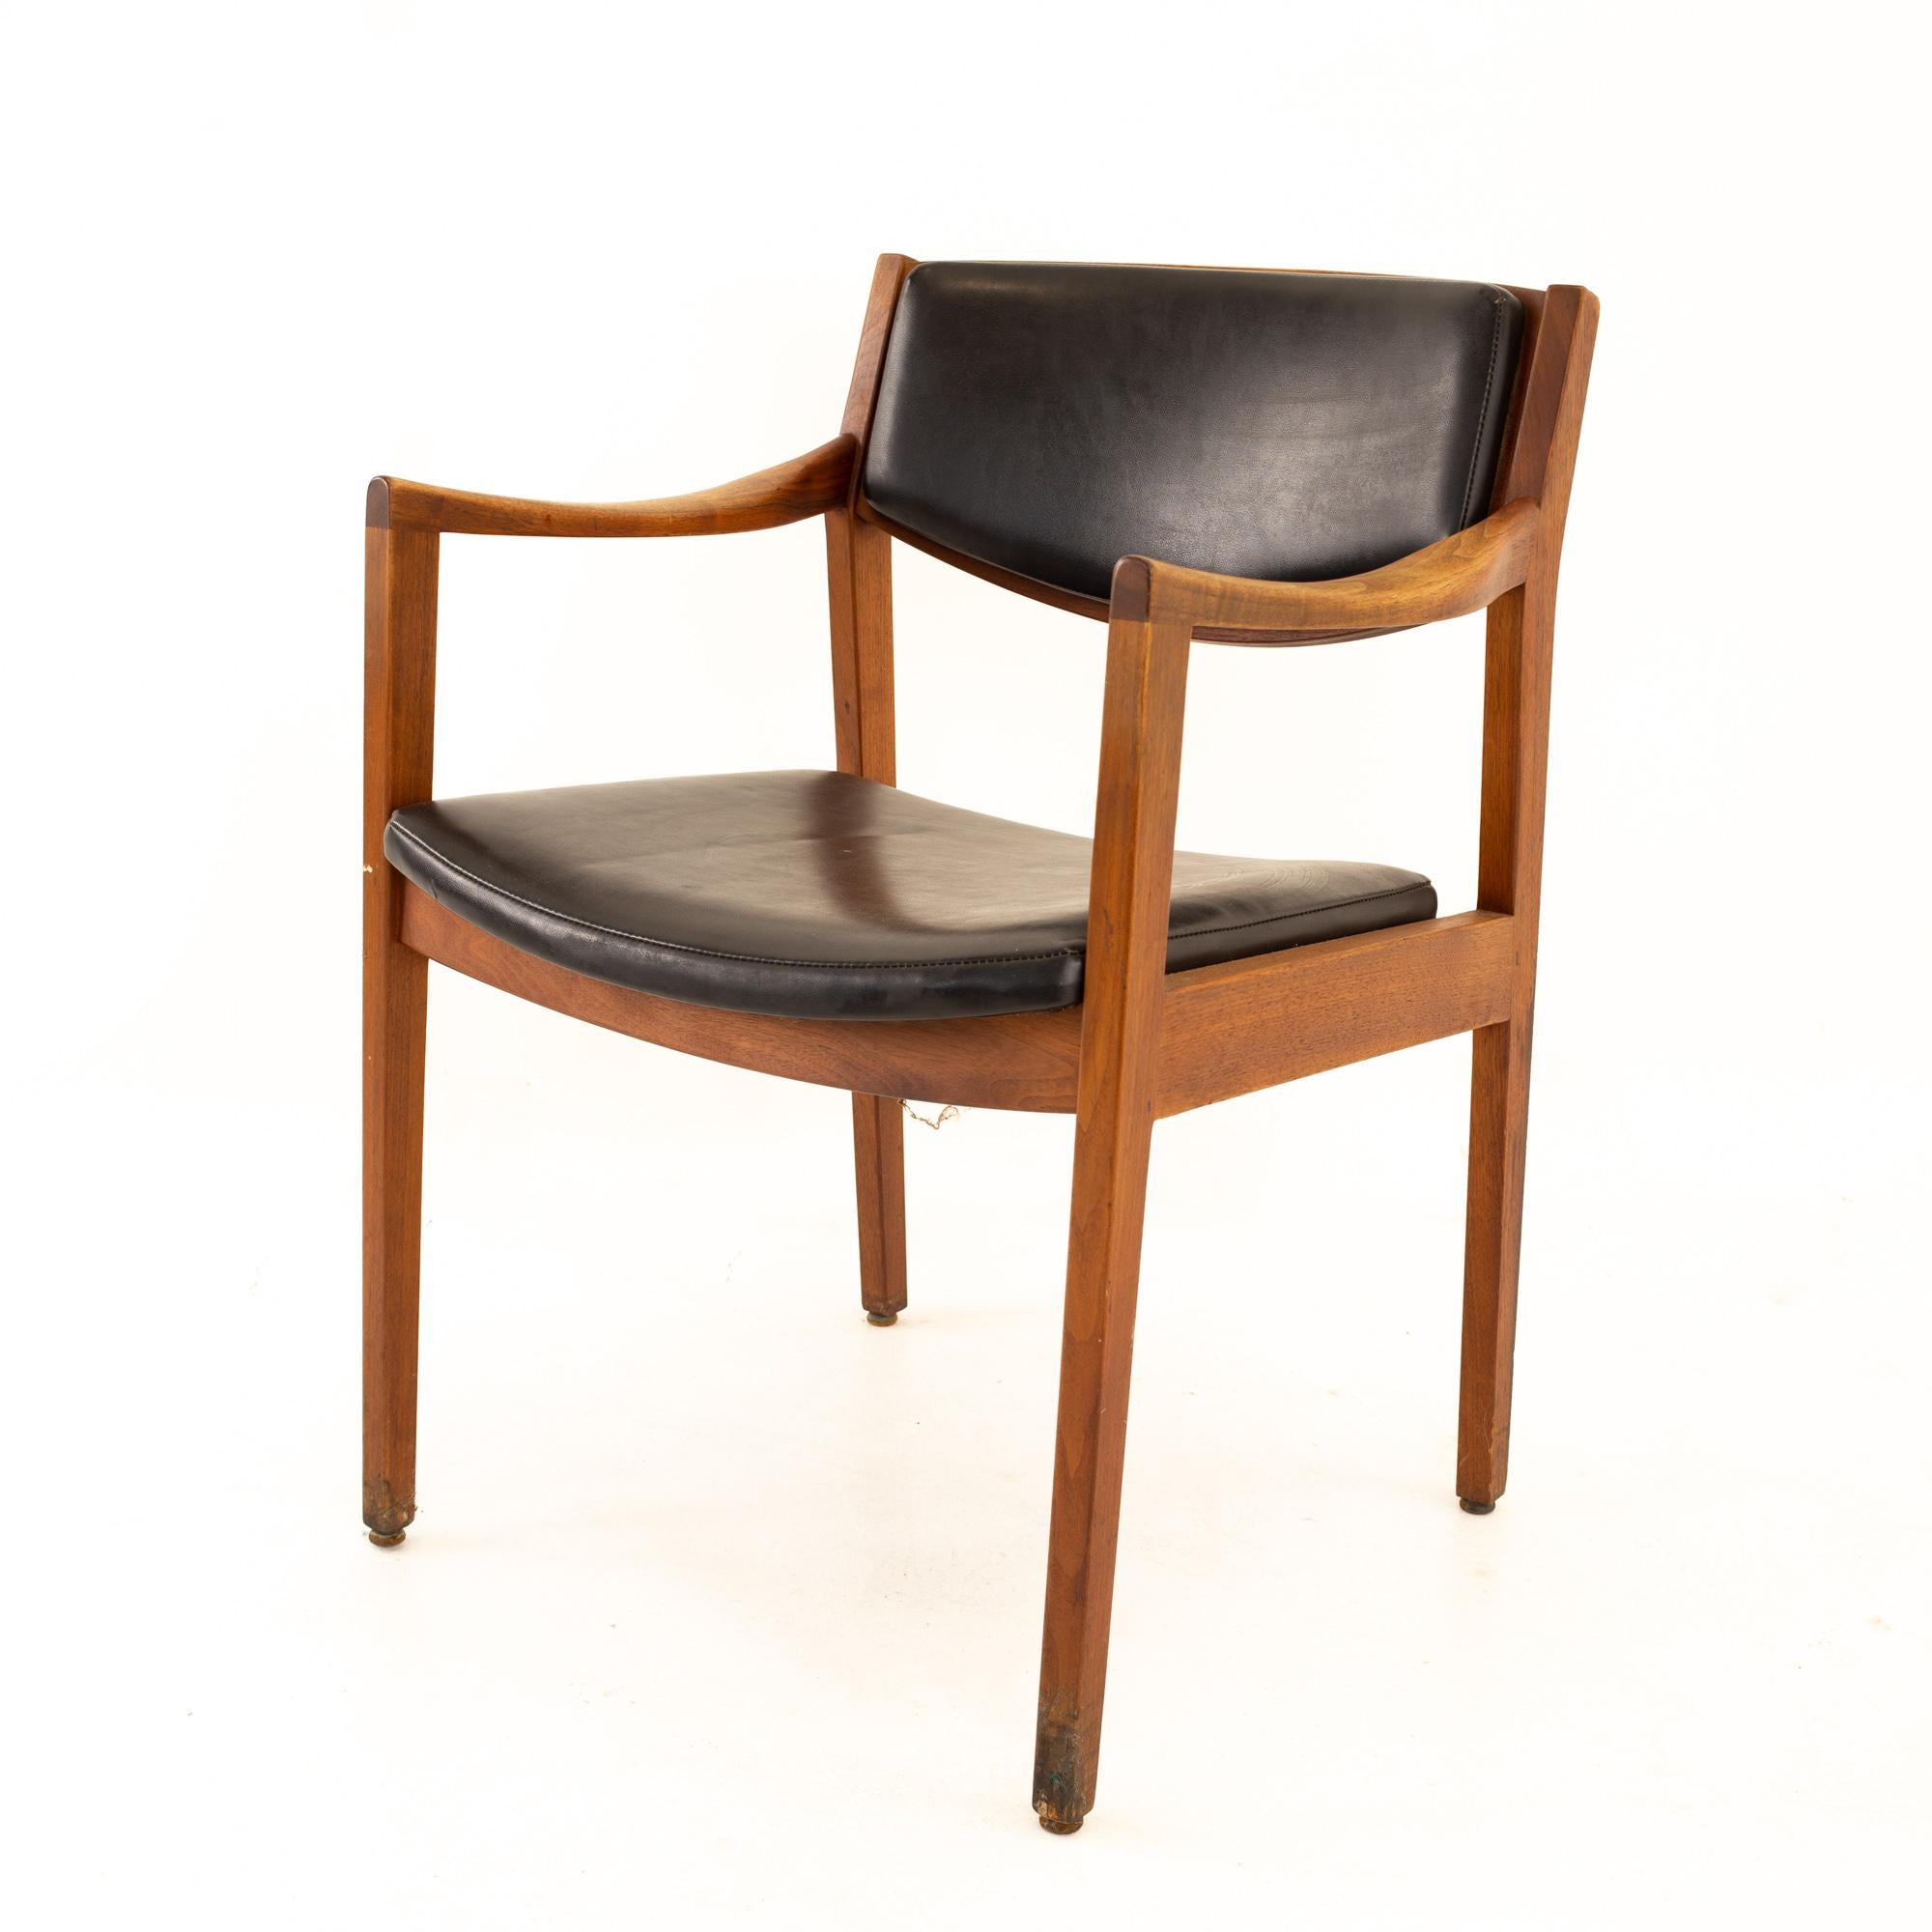 Late 20th Century Gunlocke Midcentury Walnut and Black Leather Occassional Chairs, Pair